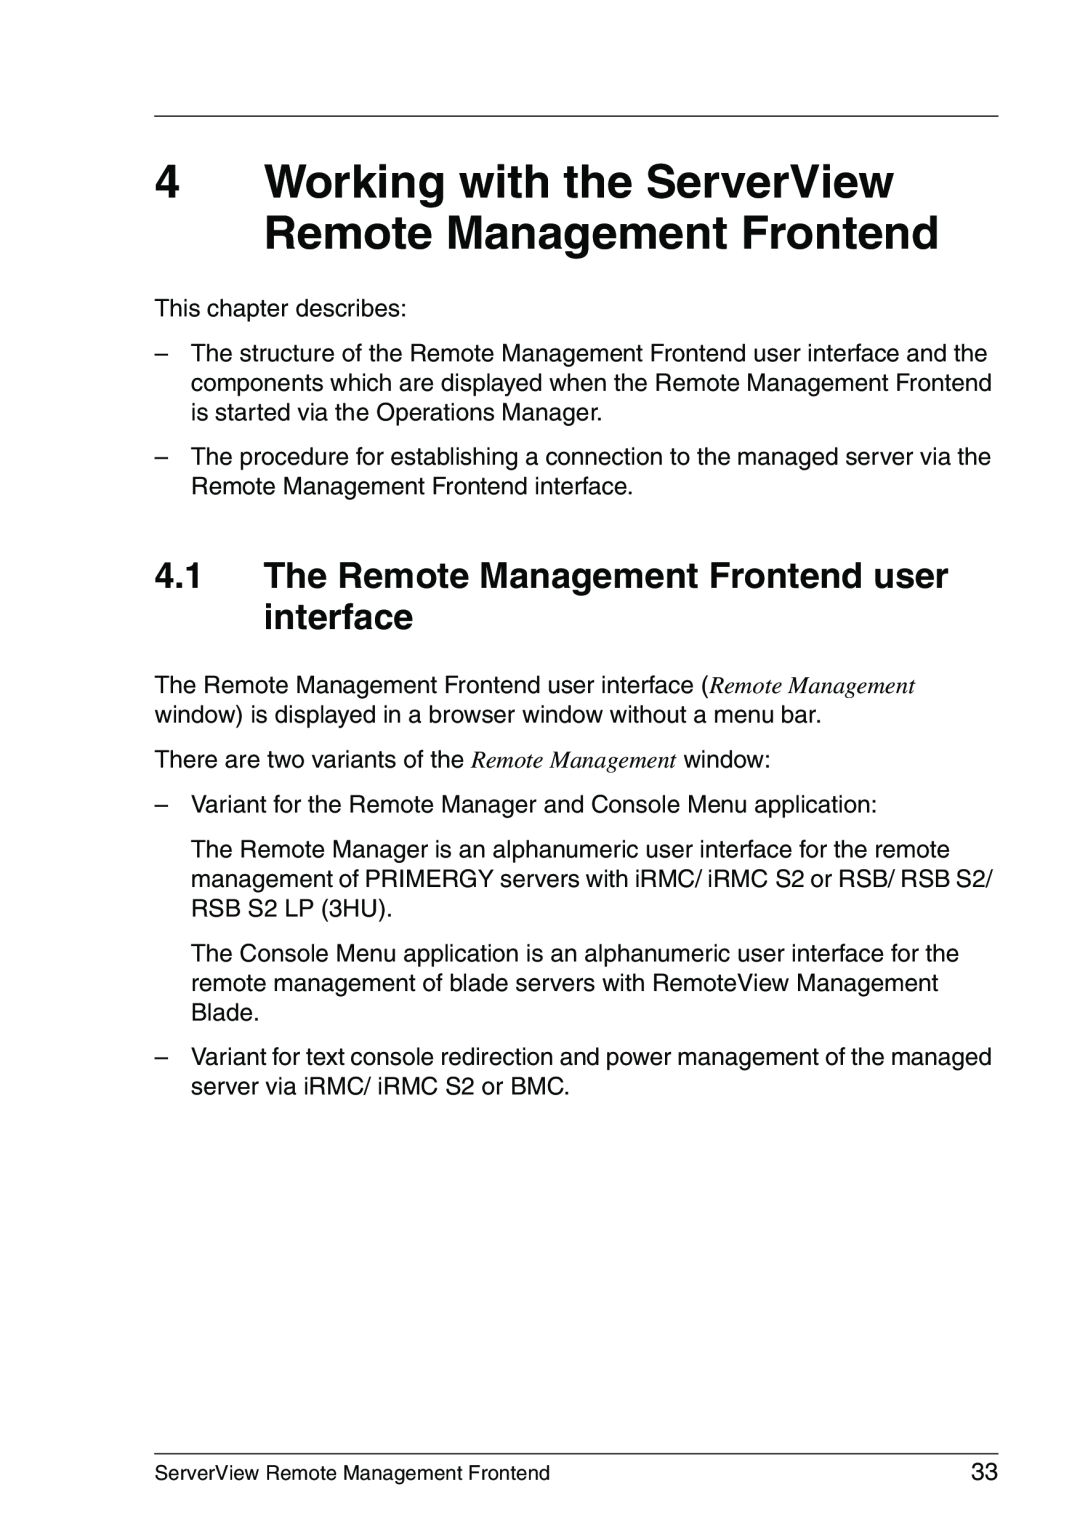 Fujitsu V4.90 manual Working with the ServerView Remote Management Frontend, The Remote Management Frontend user interface 